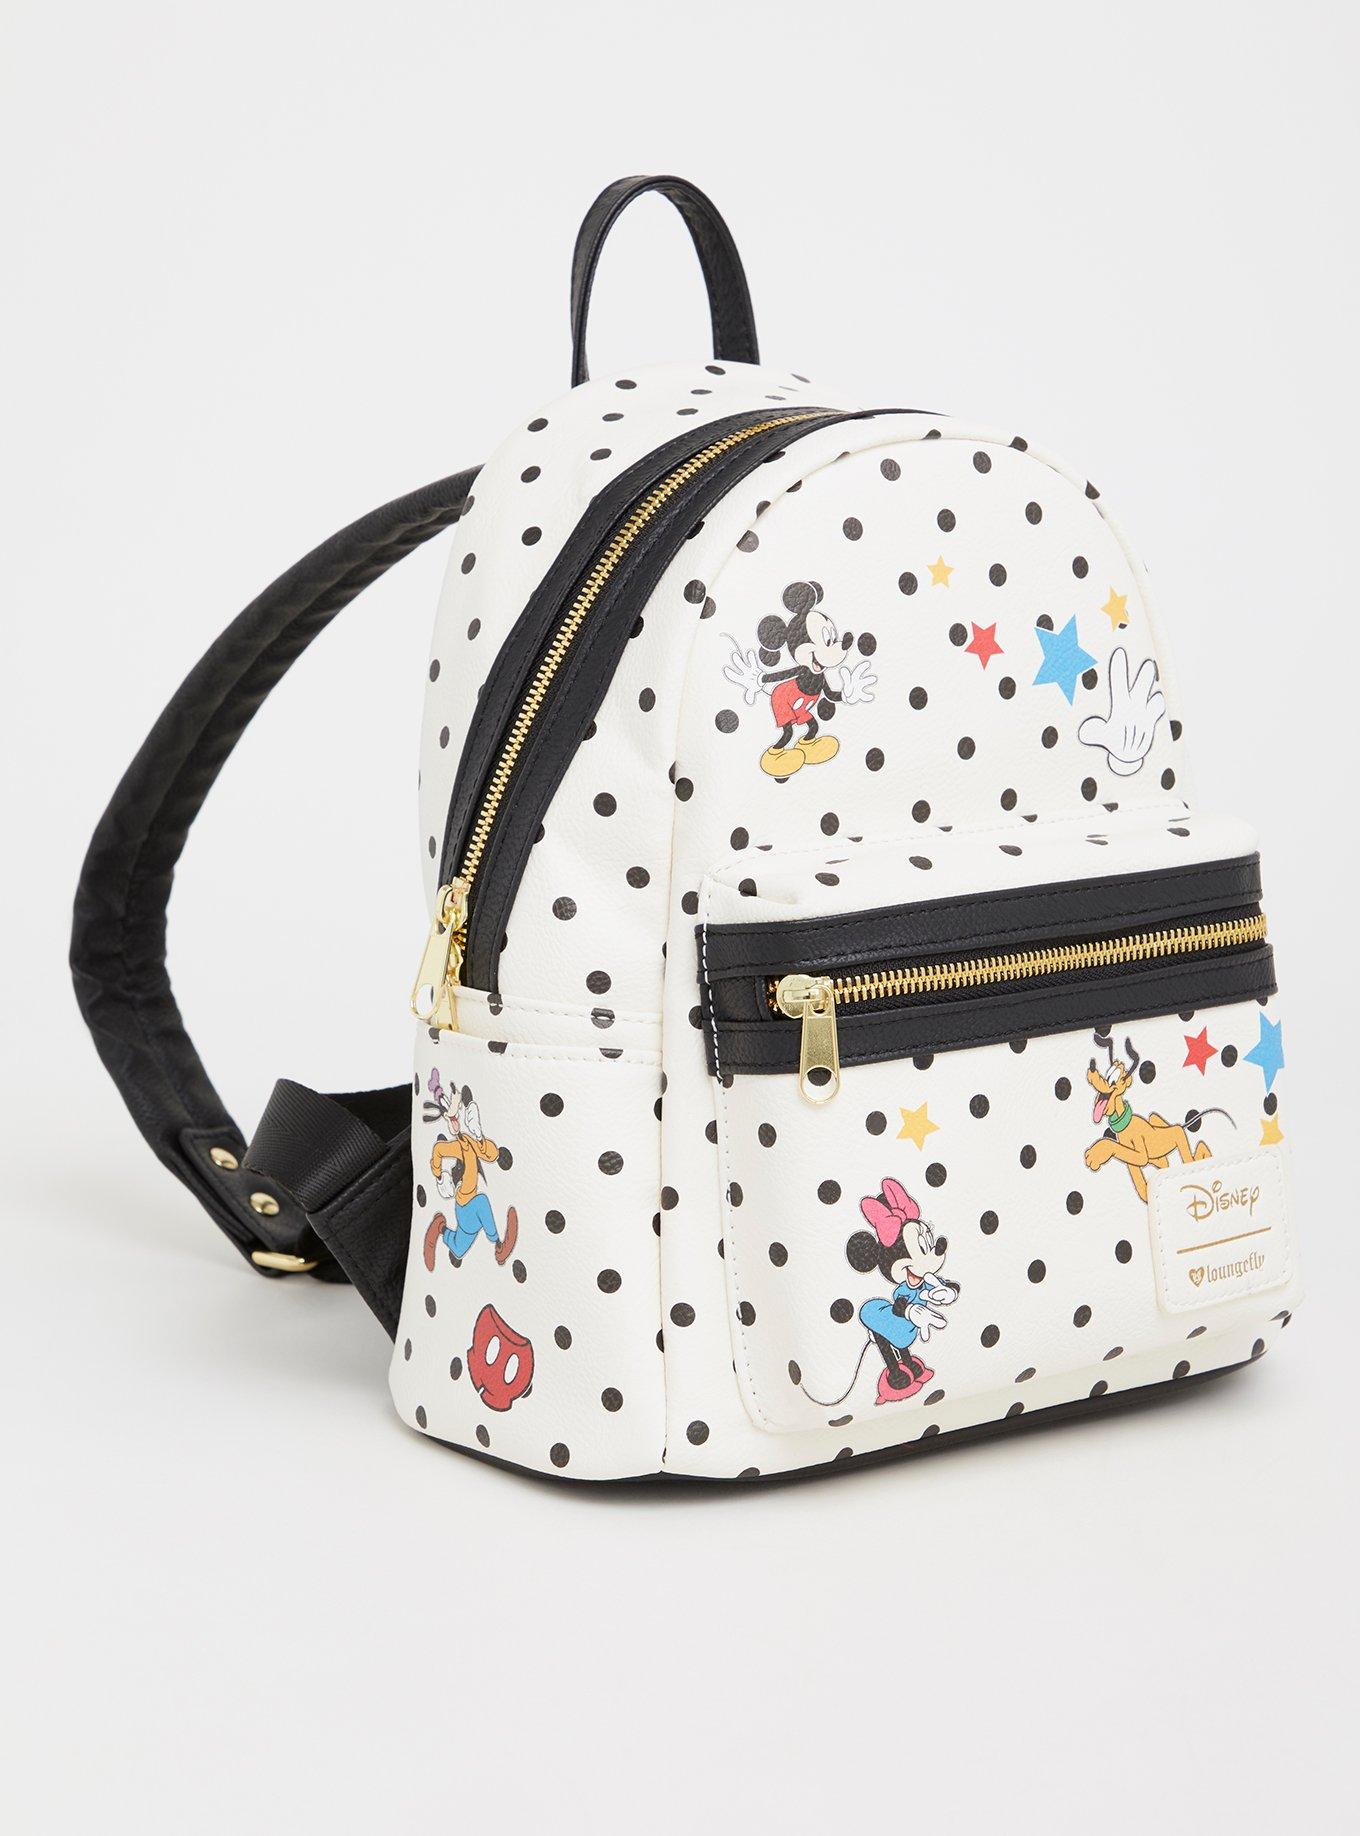 MICKEY MOUSE CROSS BODY BAG, ADJUSTABLE STRAP 11.5" X 7.5